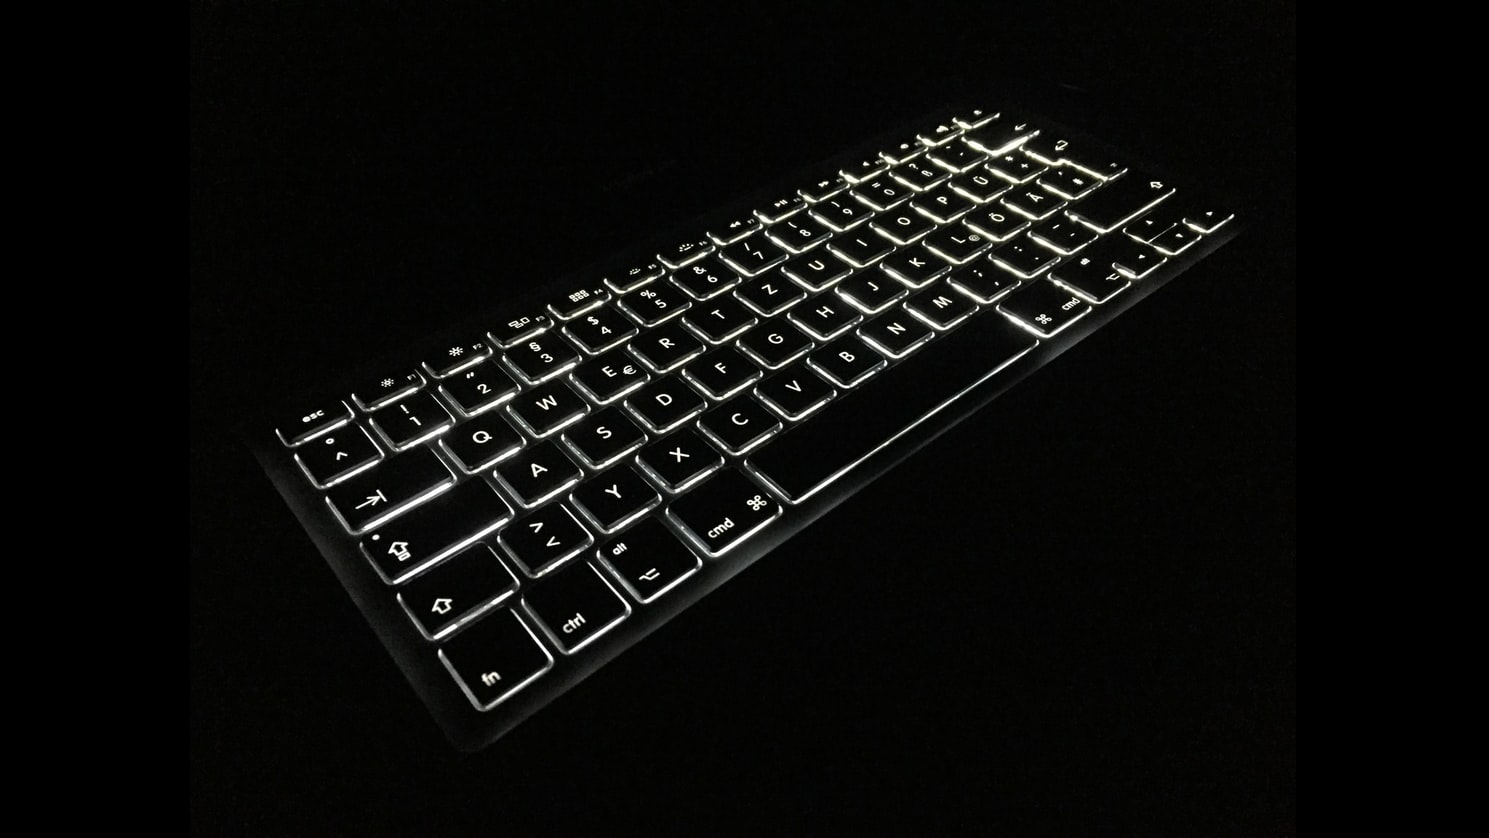 A black keyboard on a black background with keyboard lit up